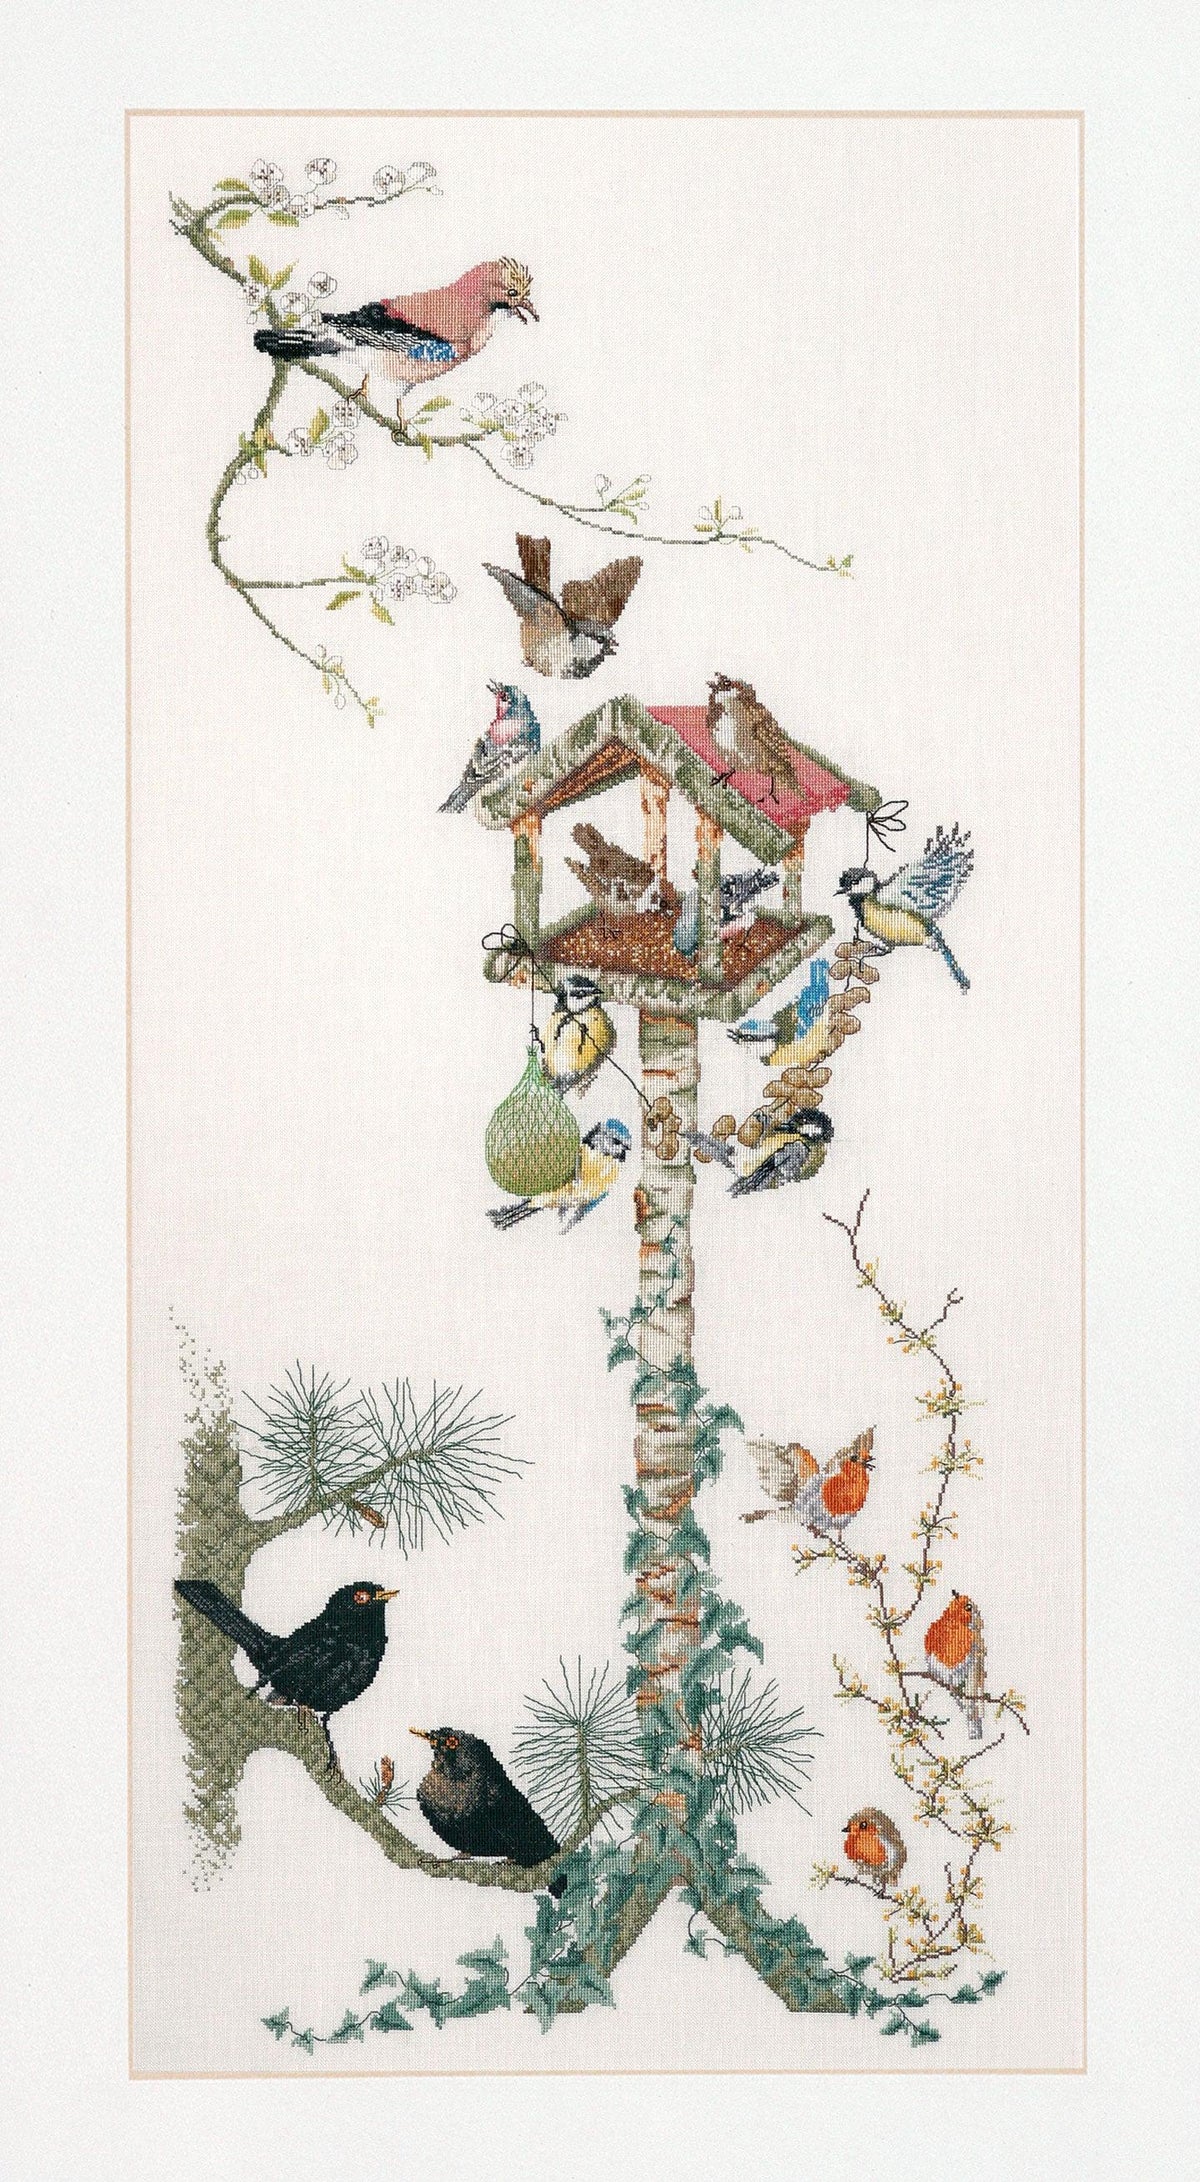 Thea Gouverneur - Counted Cross Stitch Kit - Bird Table - Aida - 18 count - 1065A - Thea Gouverneur Since 1959